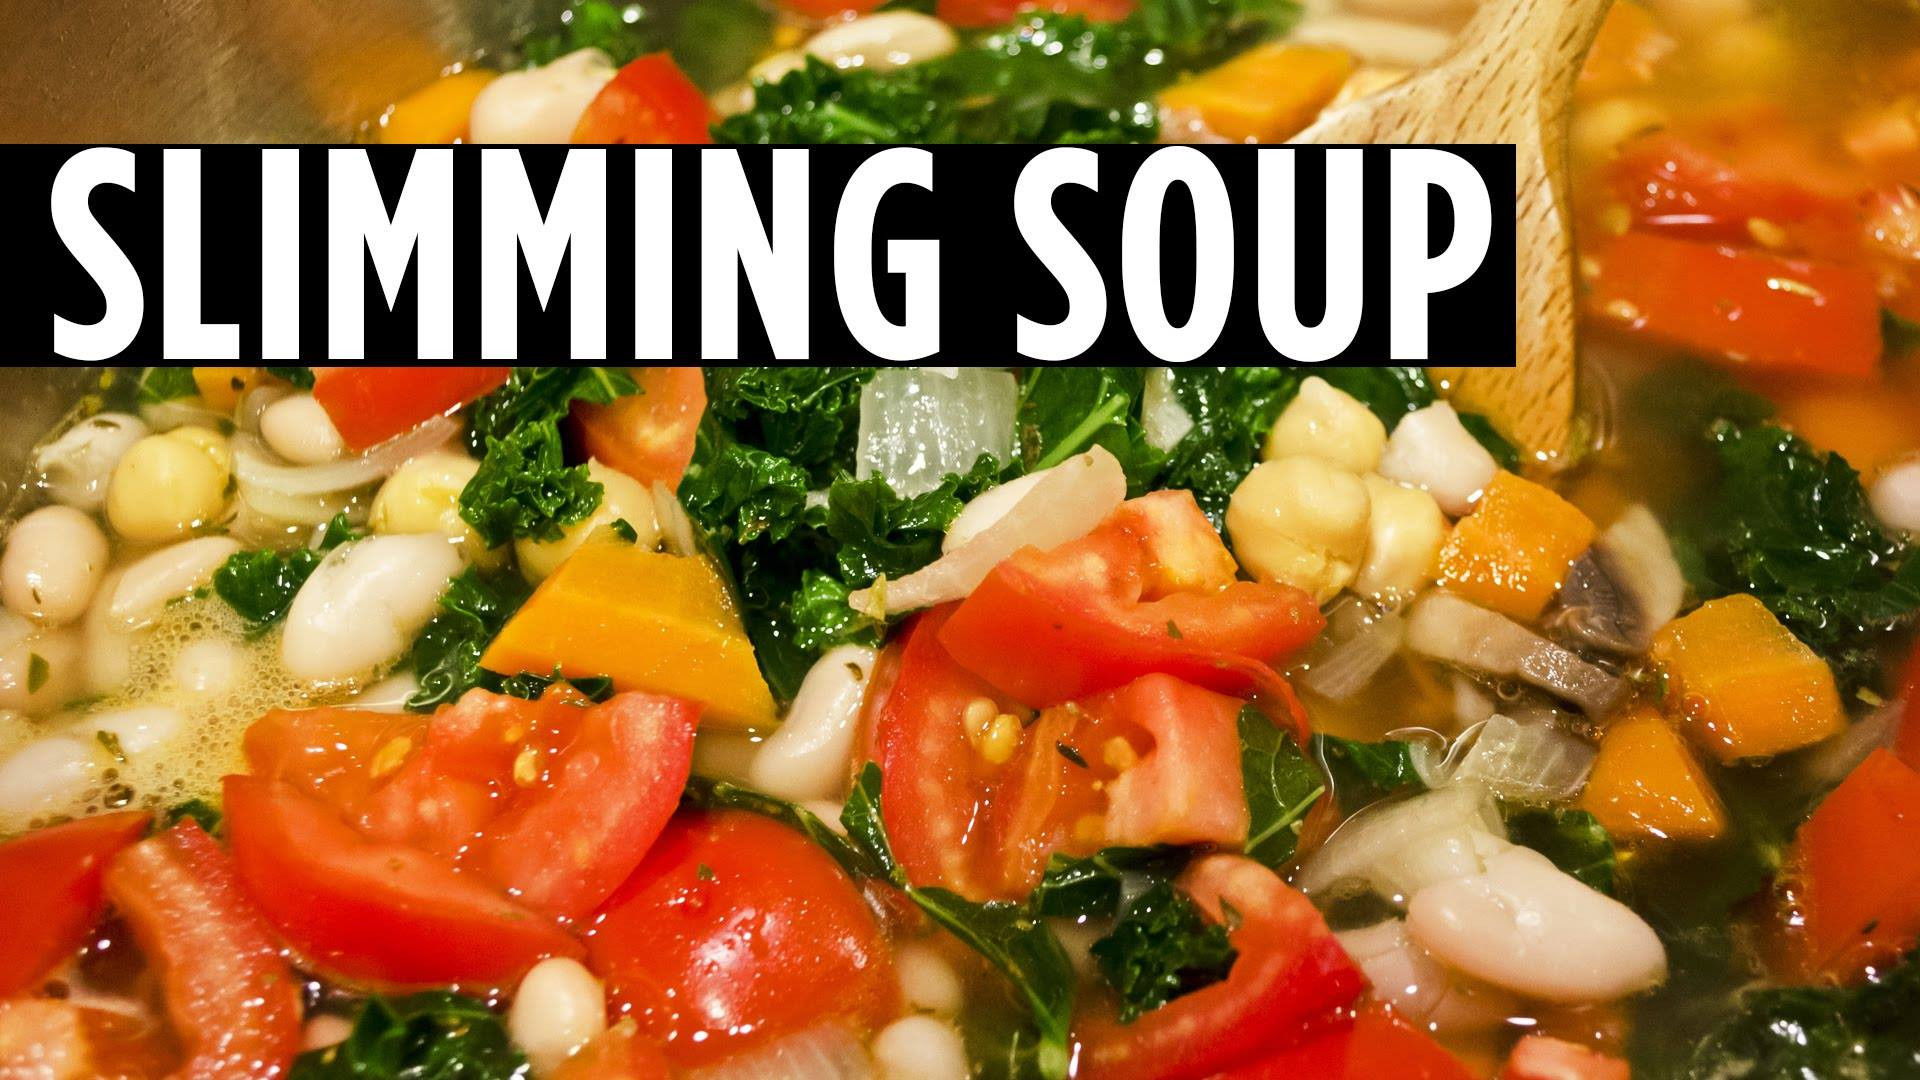 Healthy Canned Soups For Weight Loss
 Lose Weight With This Slimming Soup Recipe 7 Day Diet